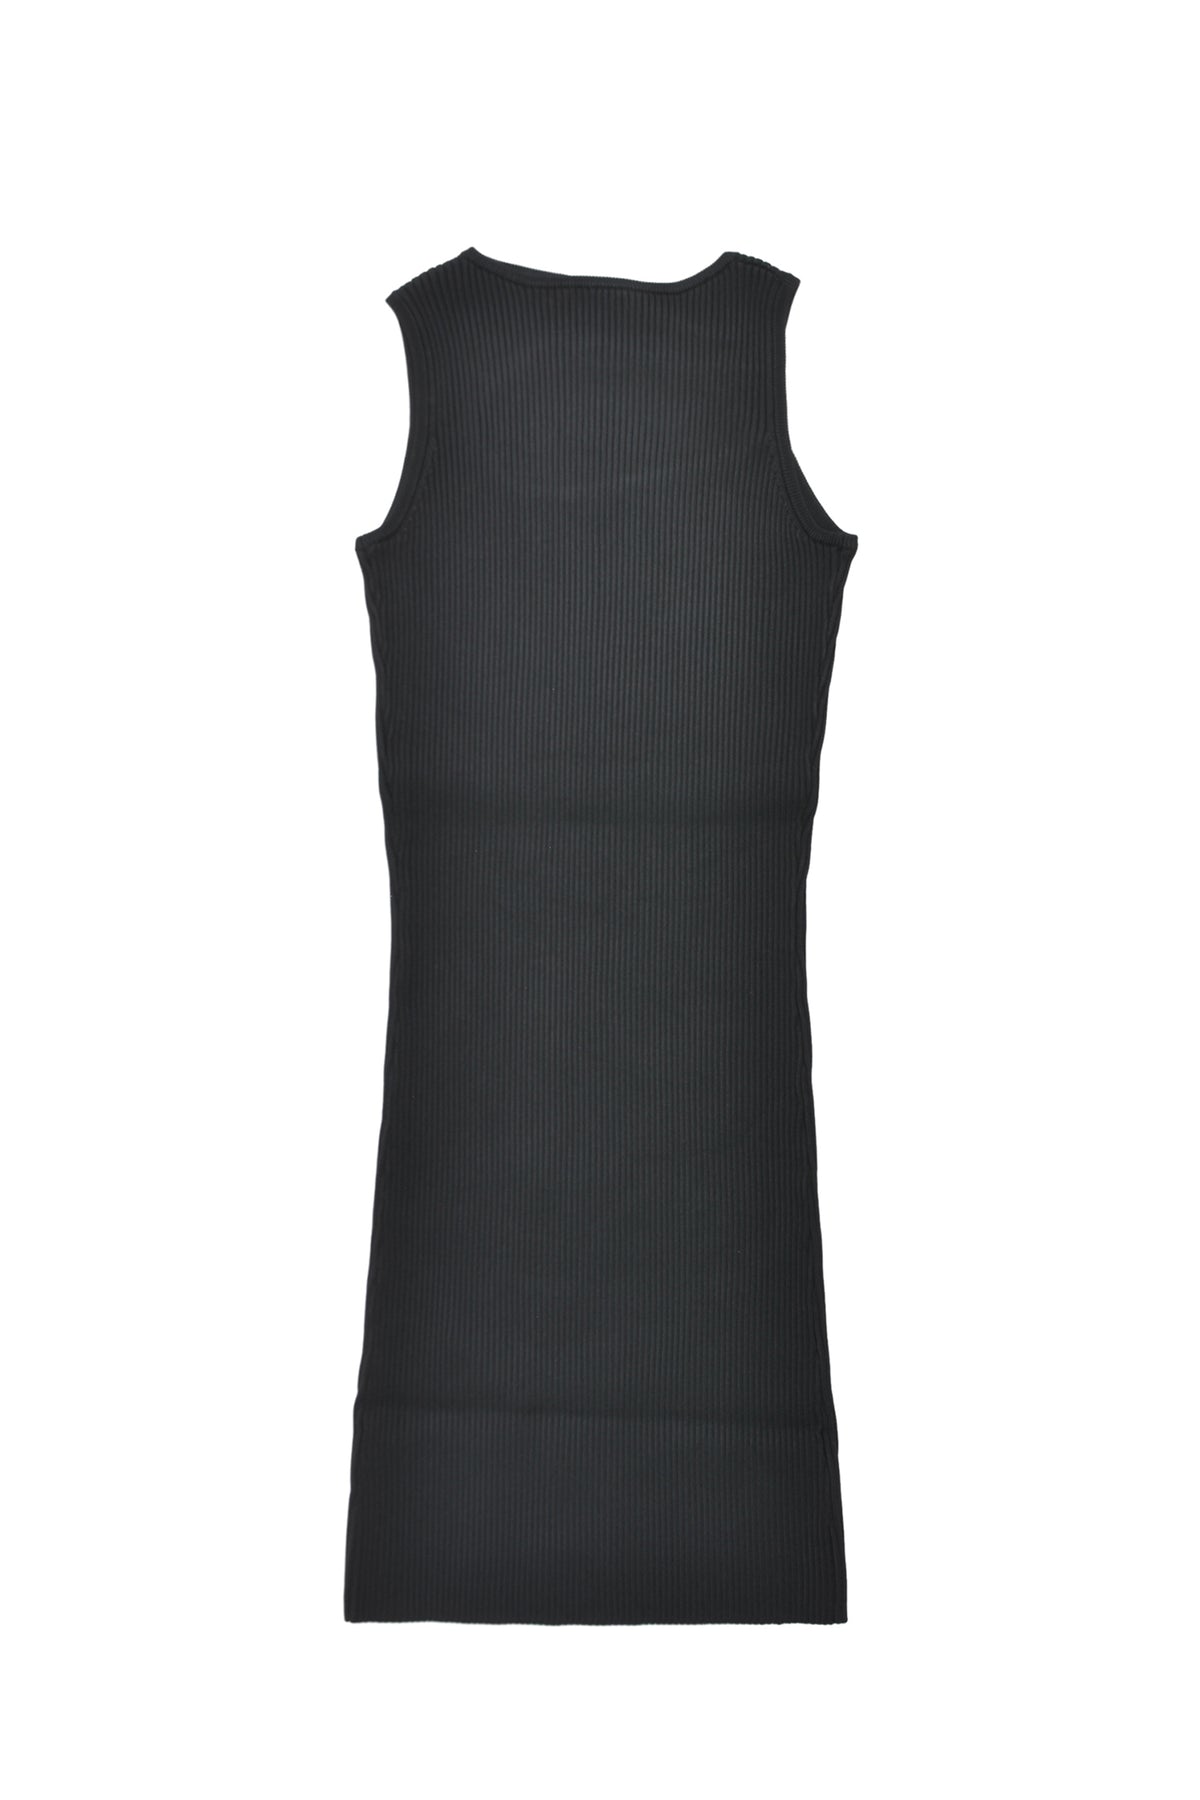 KNITTED CUT-OUT DRESS / BLK